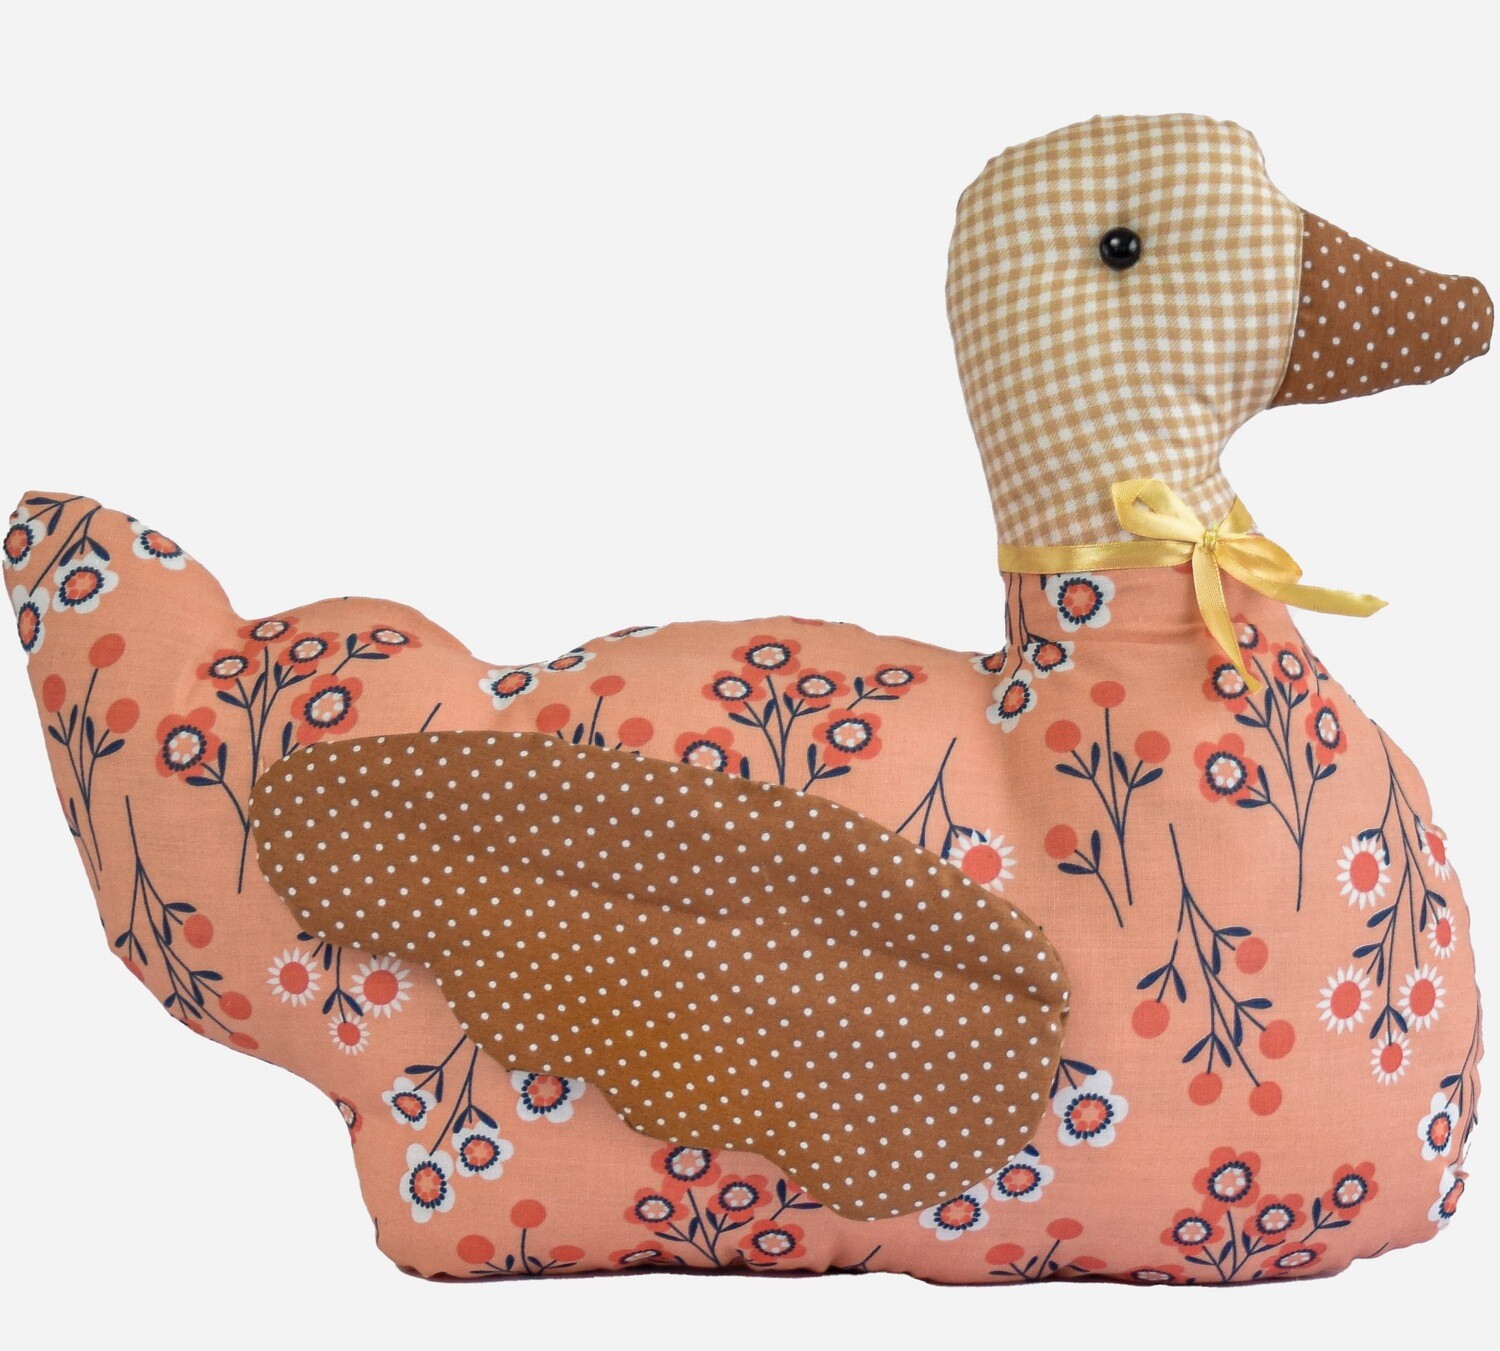 Pink duck with brown wings and beak, Large